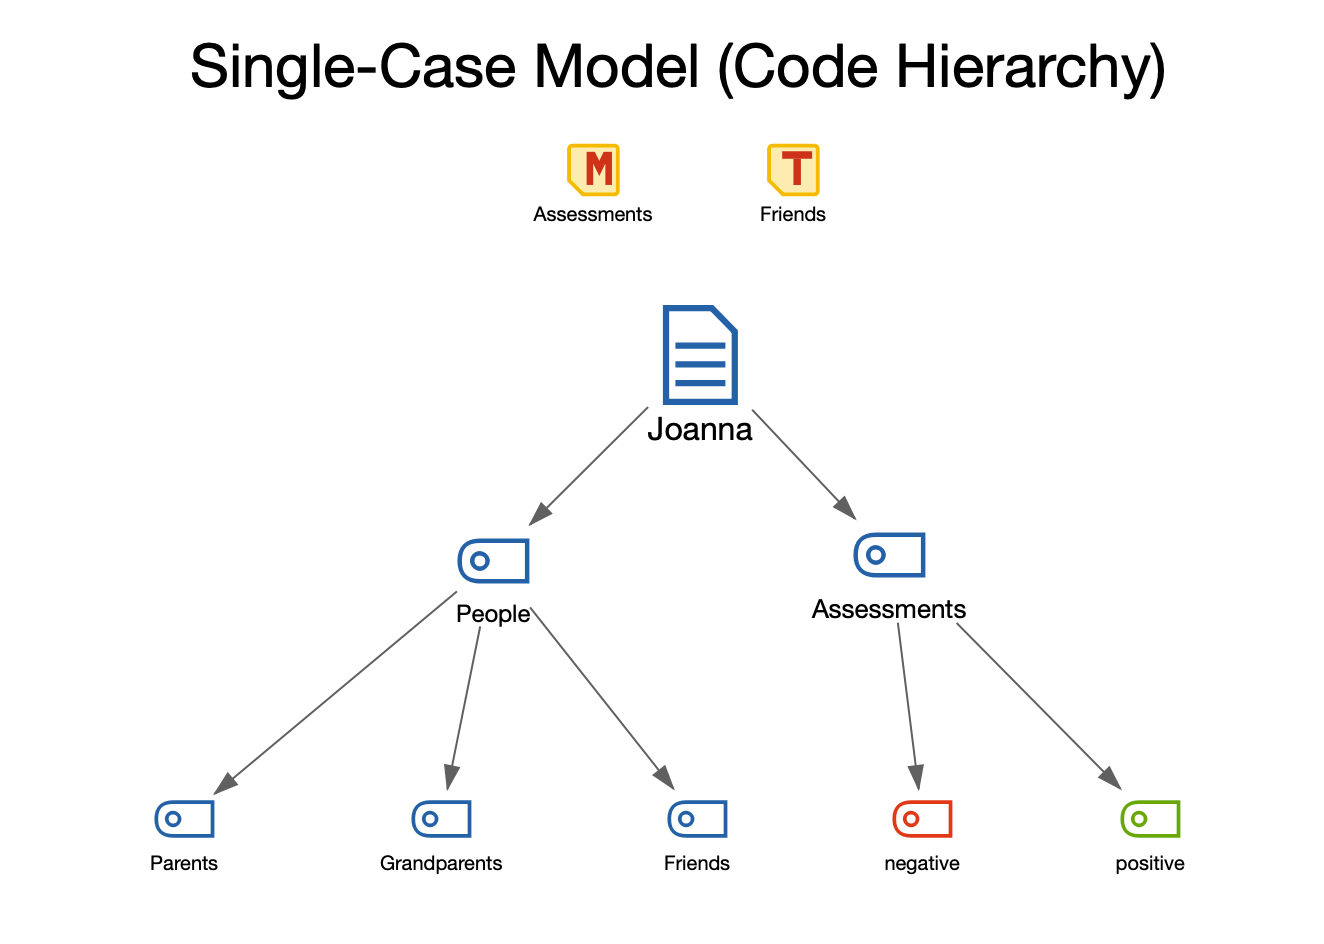 Example of an 'individual case model with code hierarchy'